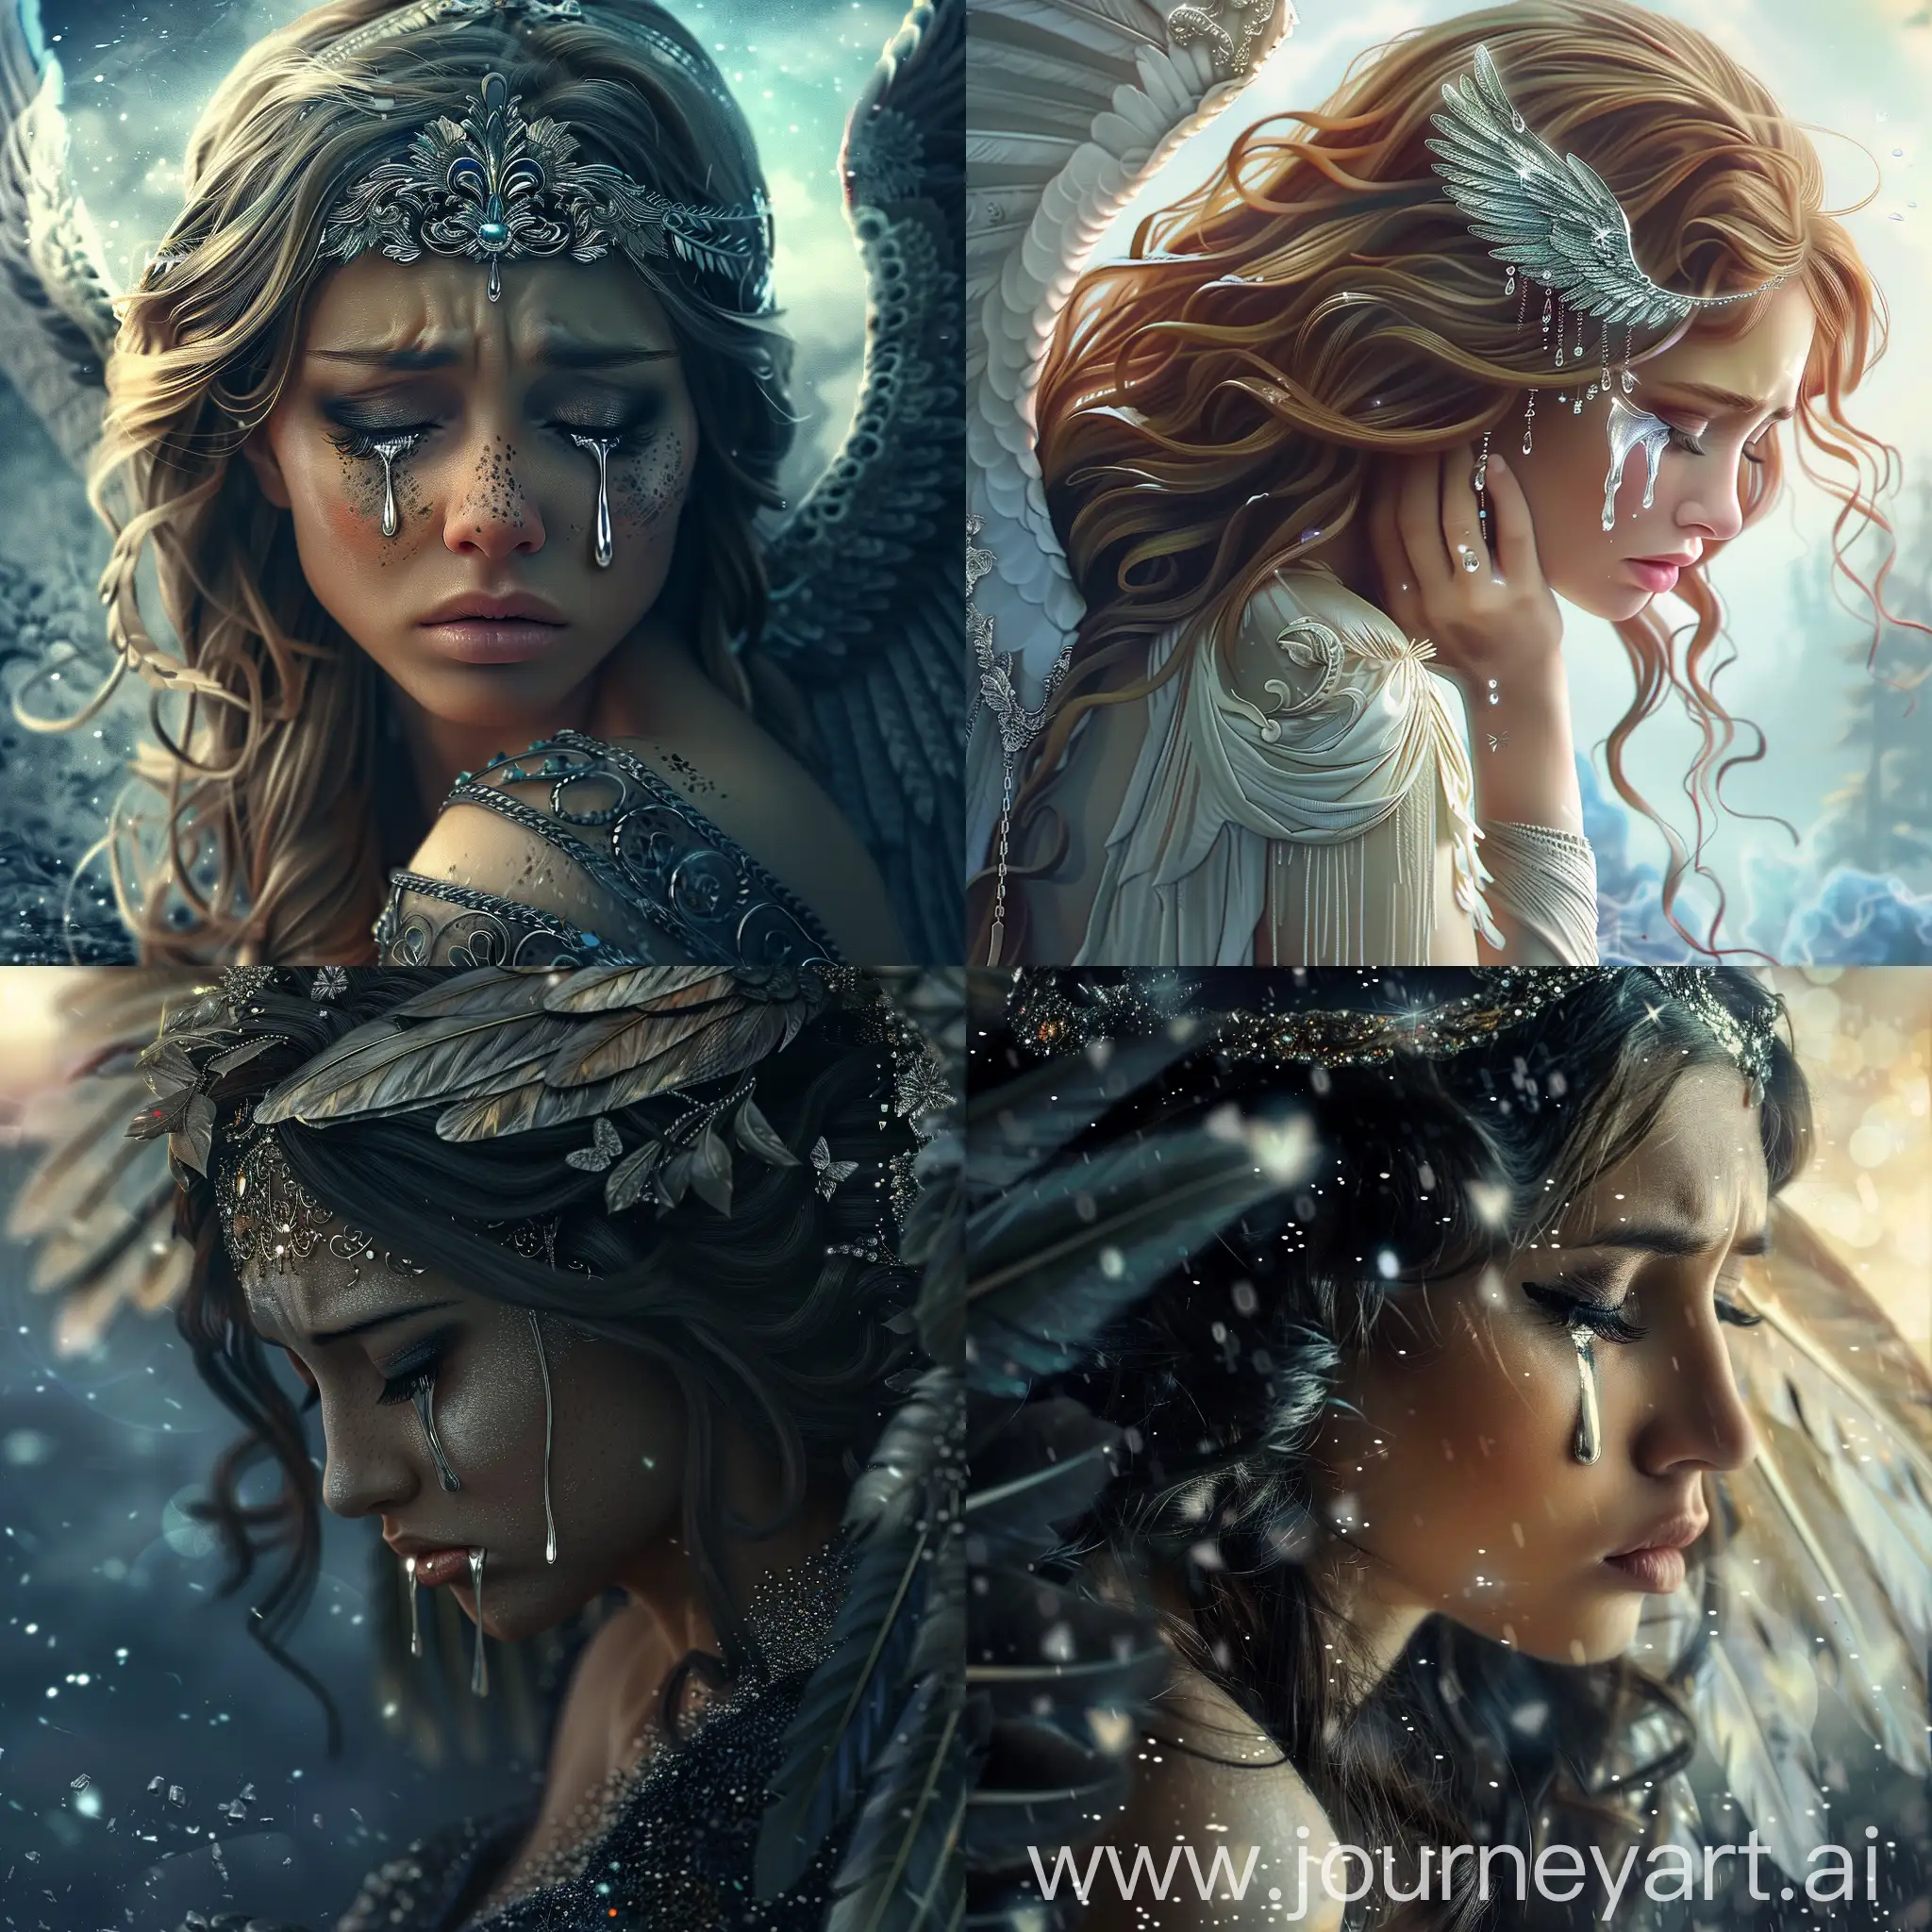 A beautiful sad angel crying tears of silver down her face. Beautiful magical fantasy surreal highly detailed